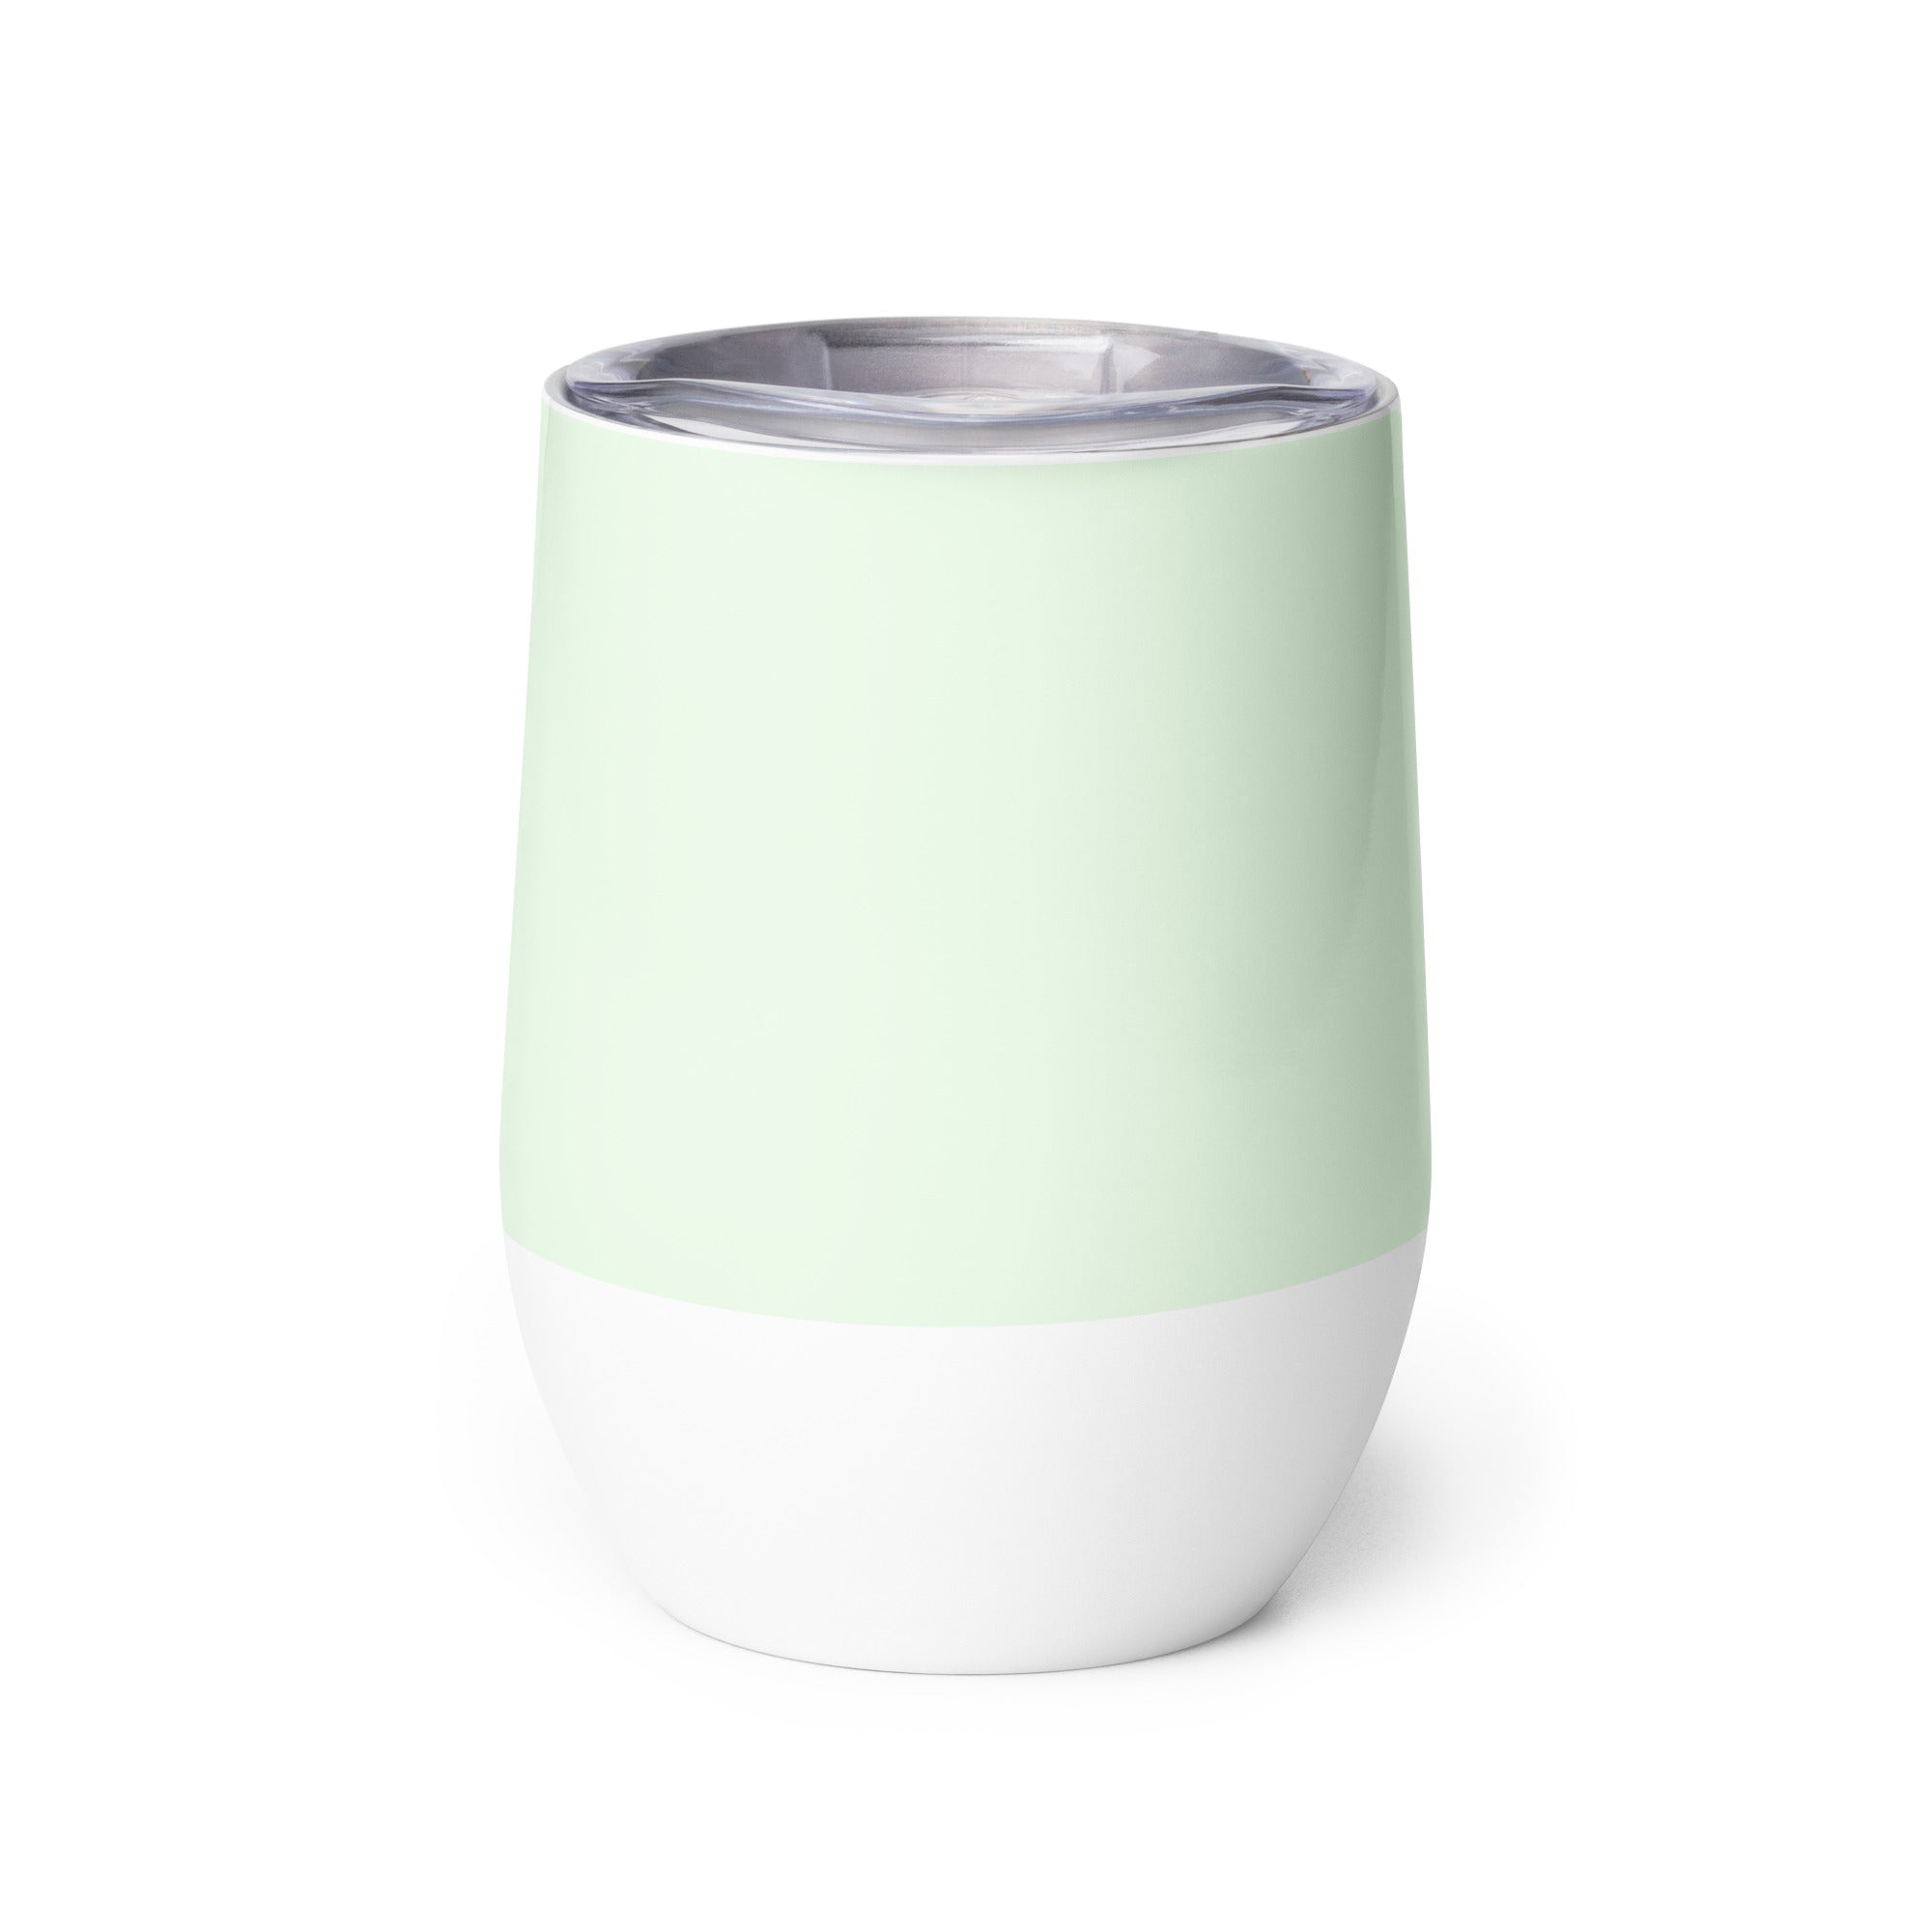 Keep it Simple: Minimalistic Wine Tumbler for Relaxed Gatherings